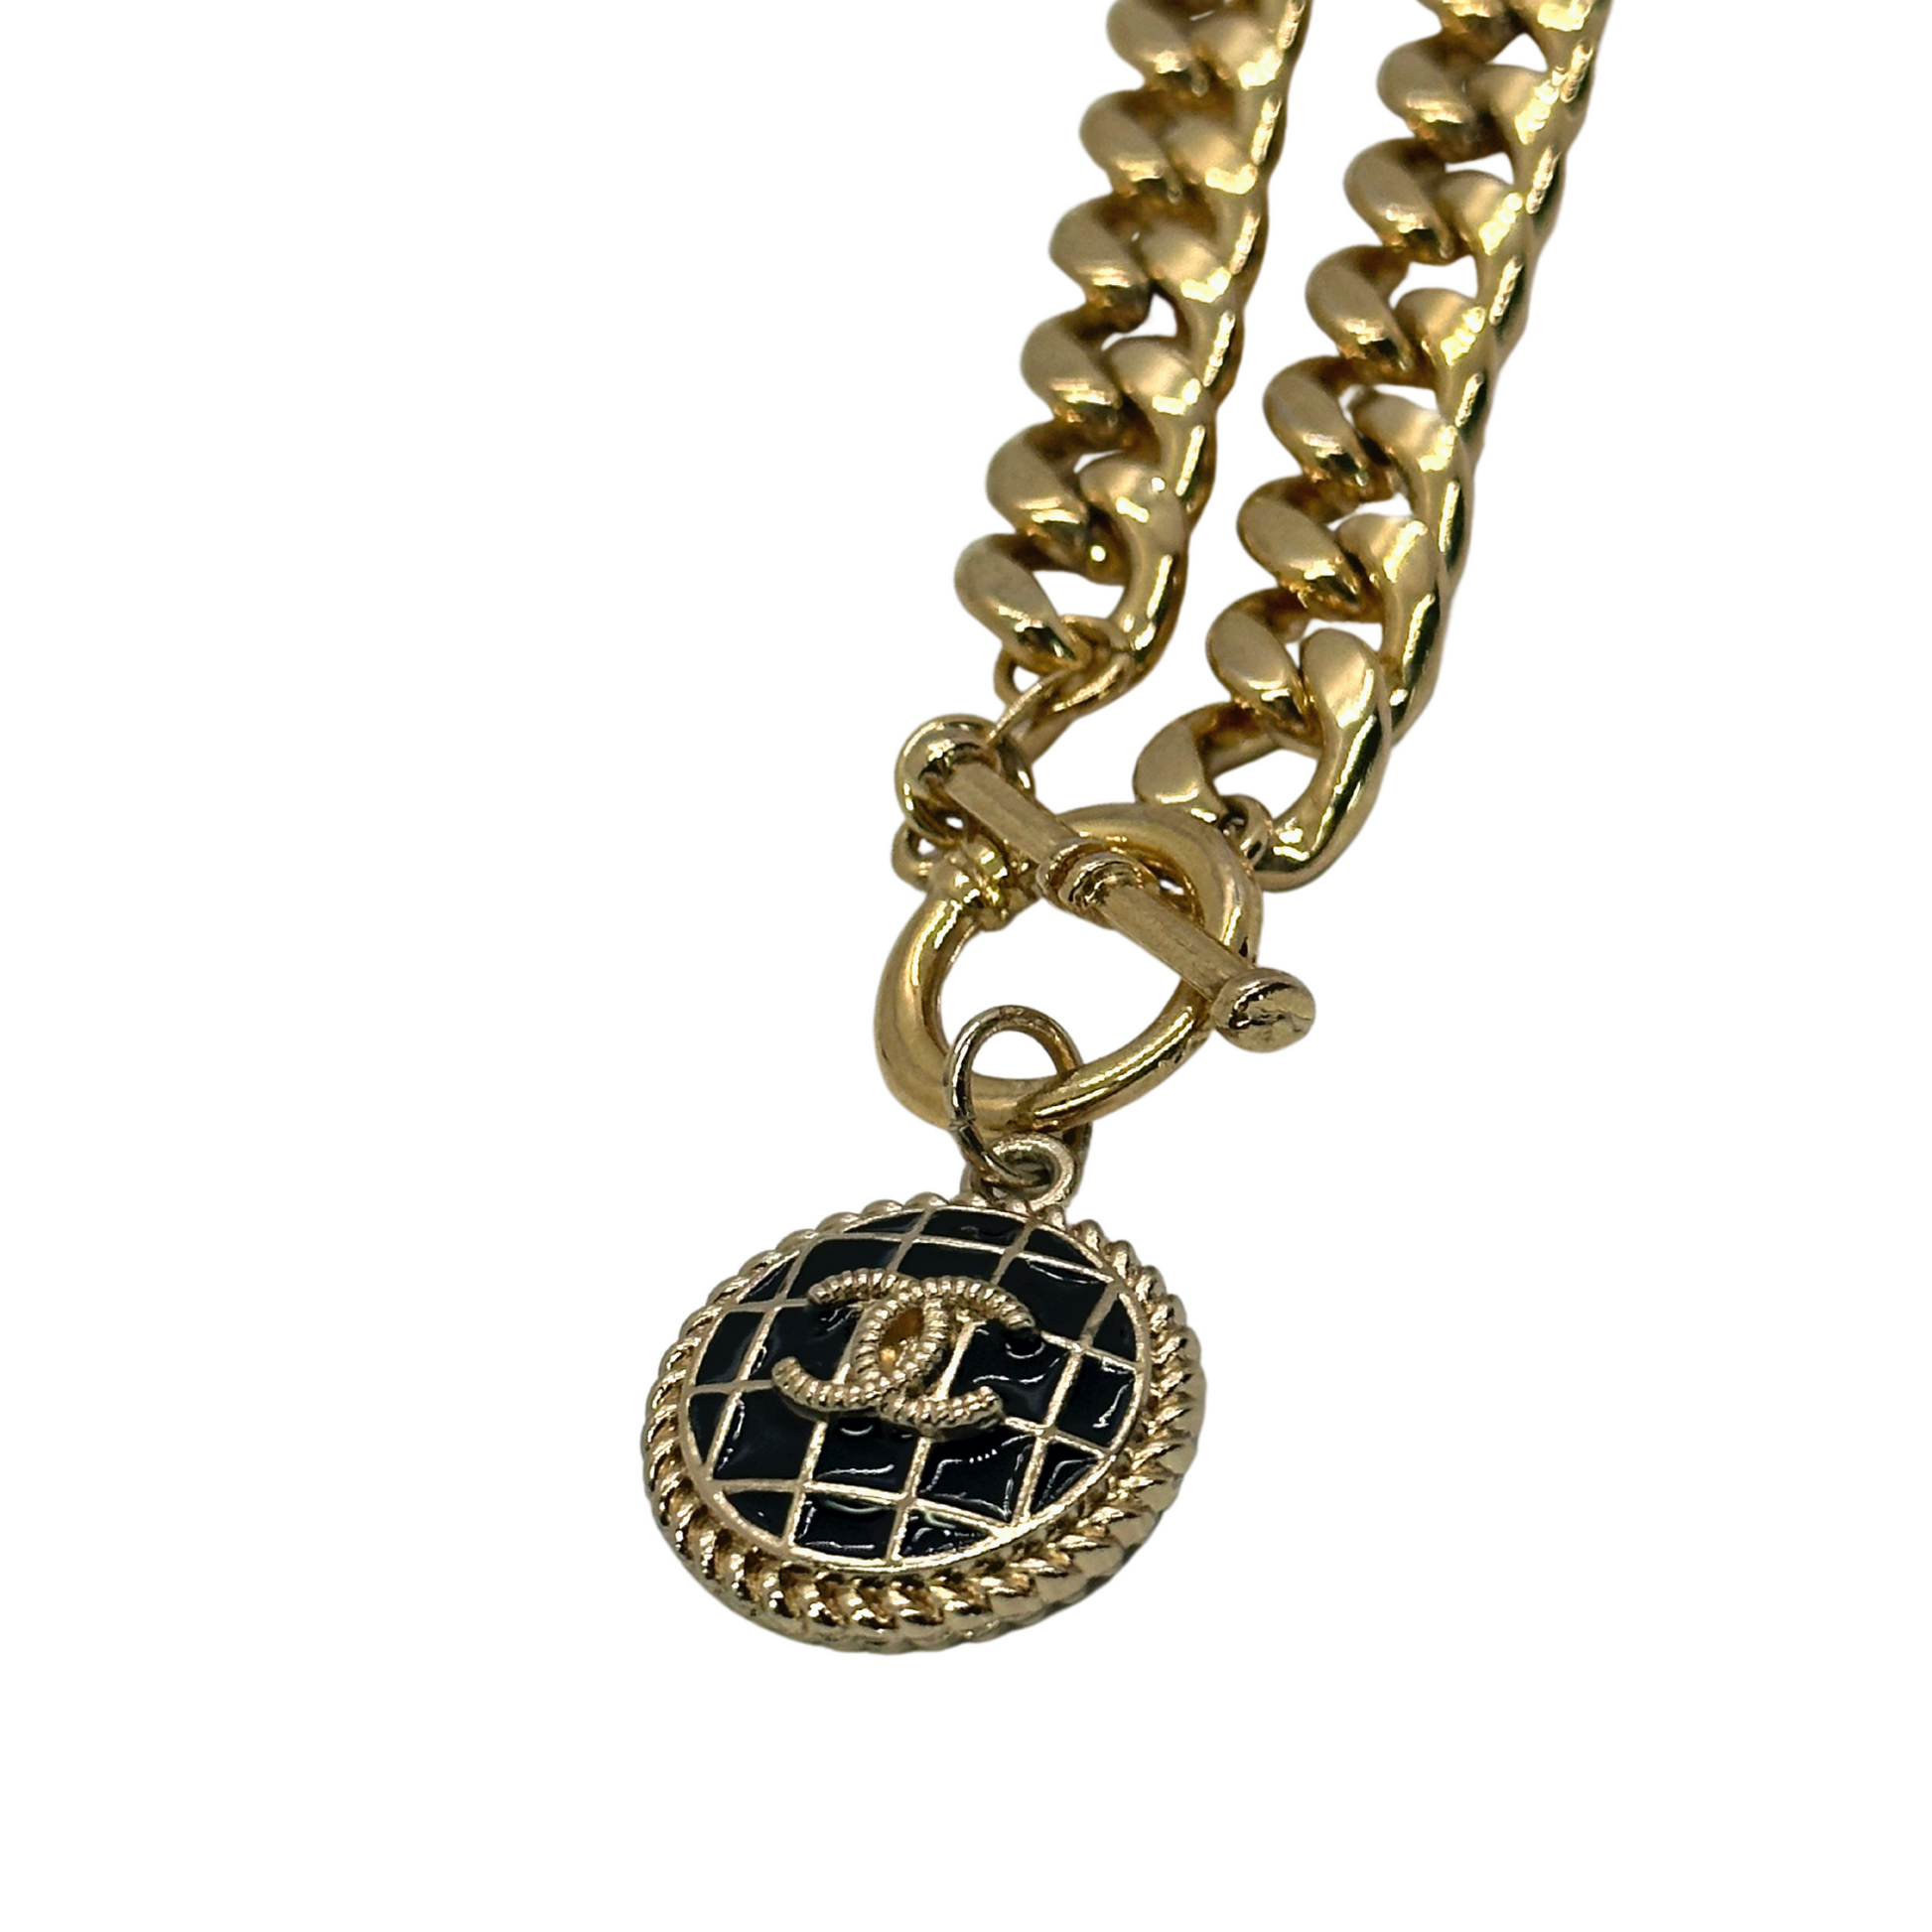 Authentic Chanel Houndstooth Pendant